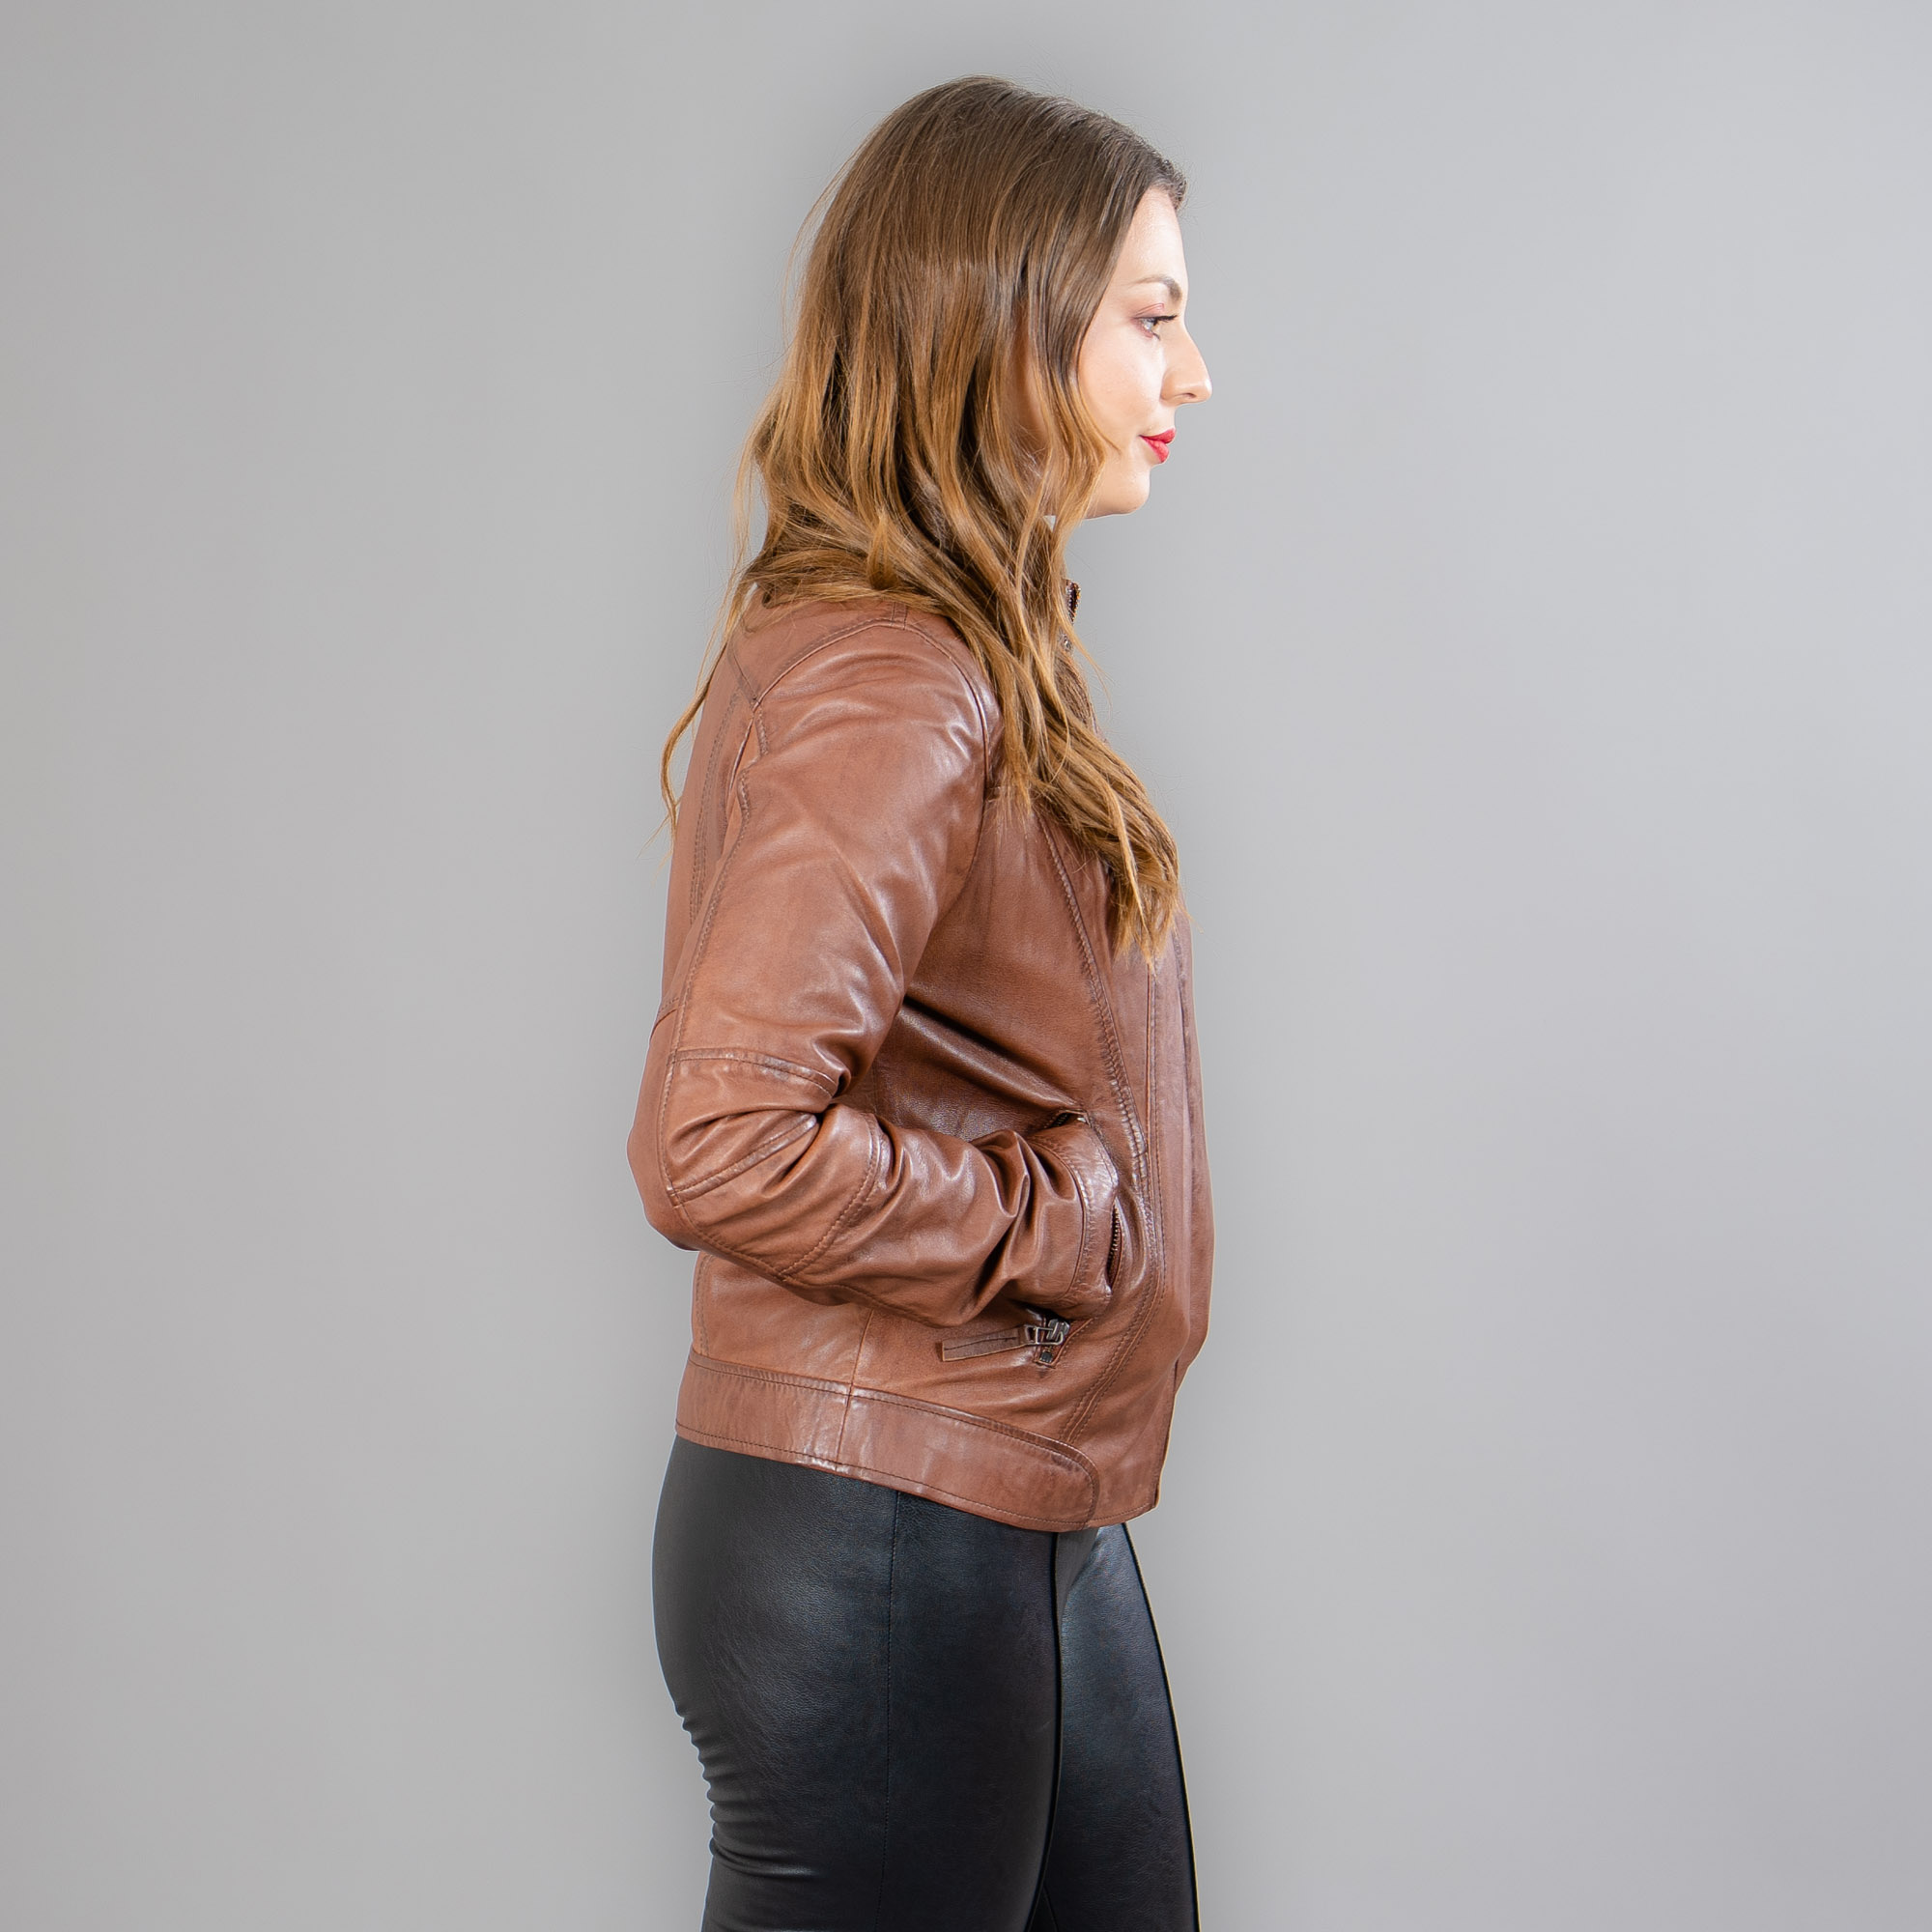 Leather jacket in brown color